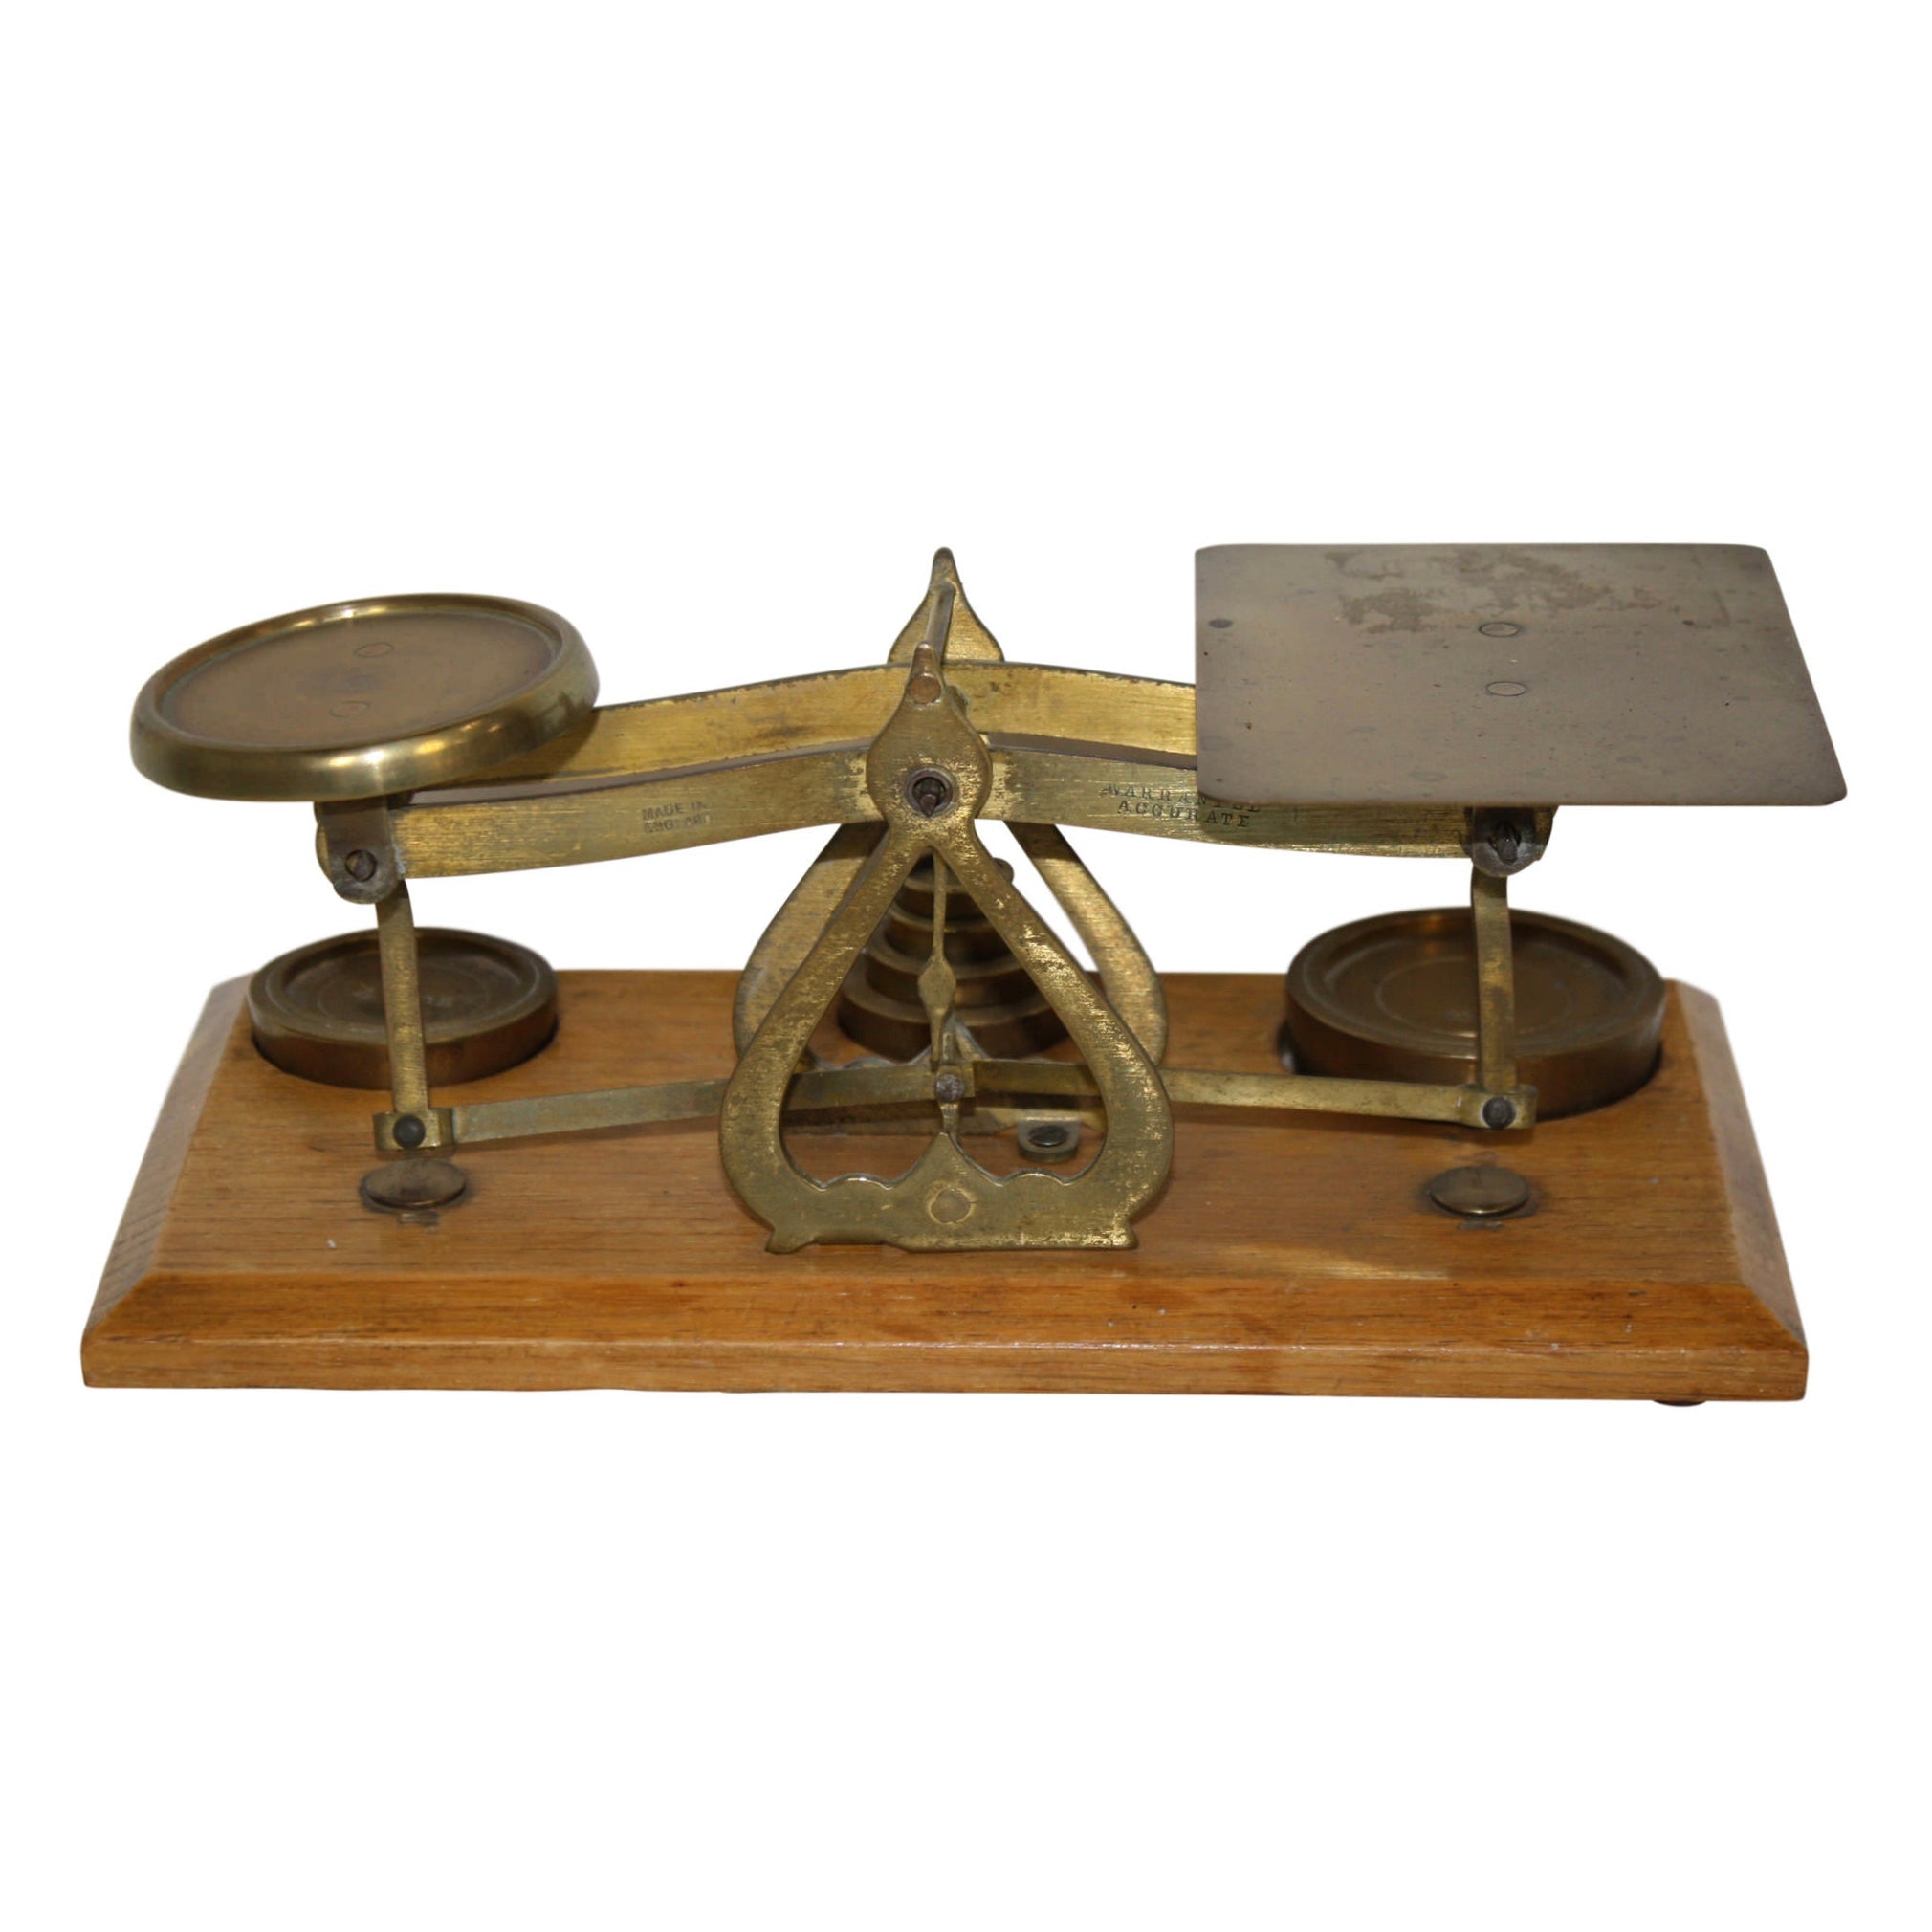 English Mail Scale and Weights